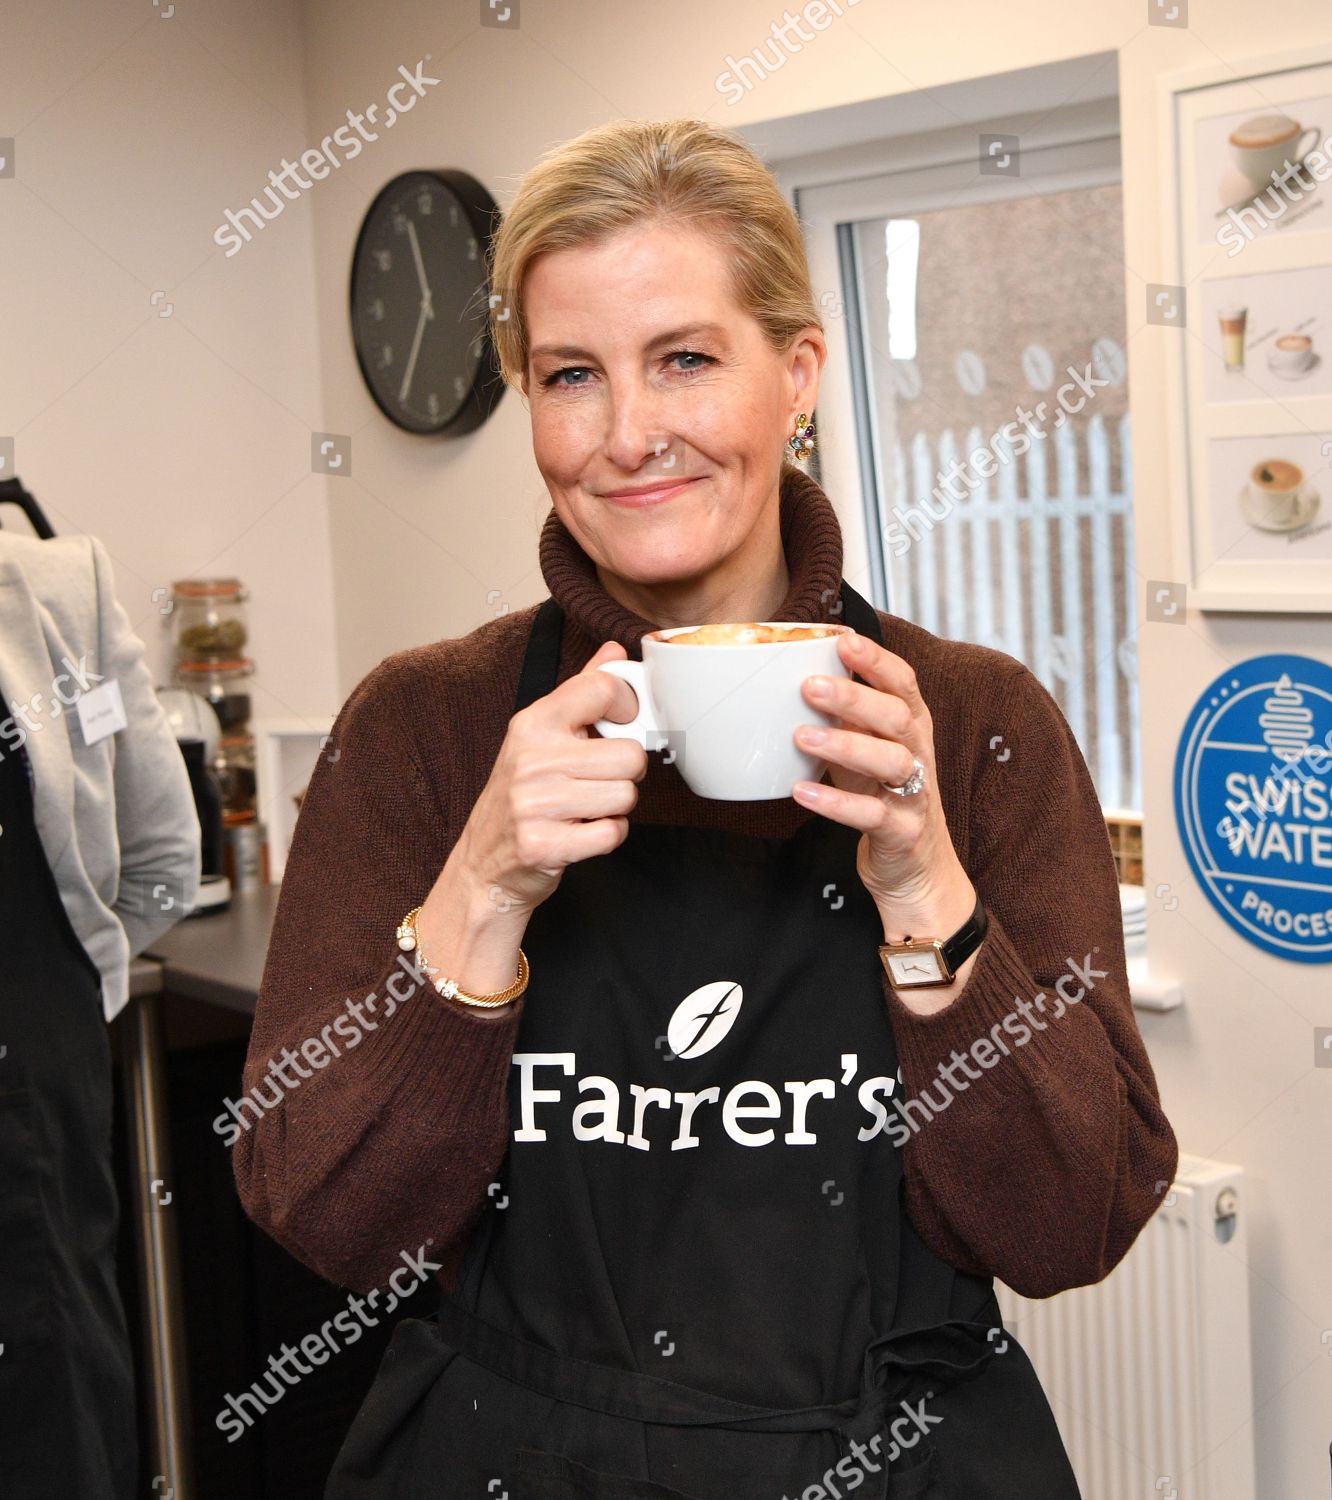 sophie-countess-of-wessex-visit-to-cumbria-shutterstock-editorial-10095439z.jpg